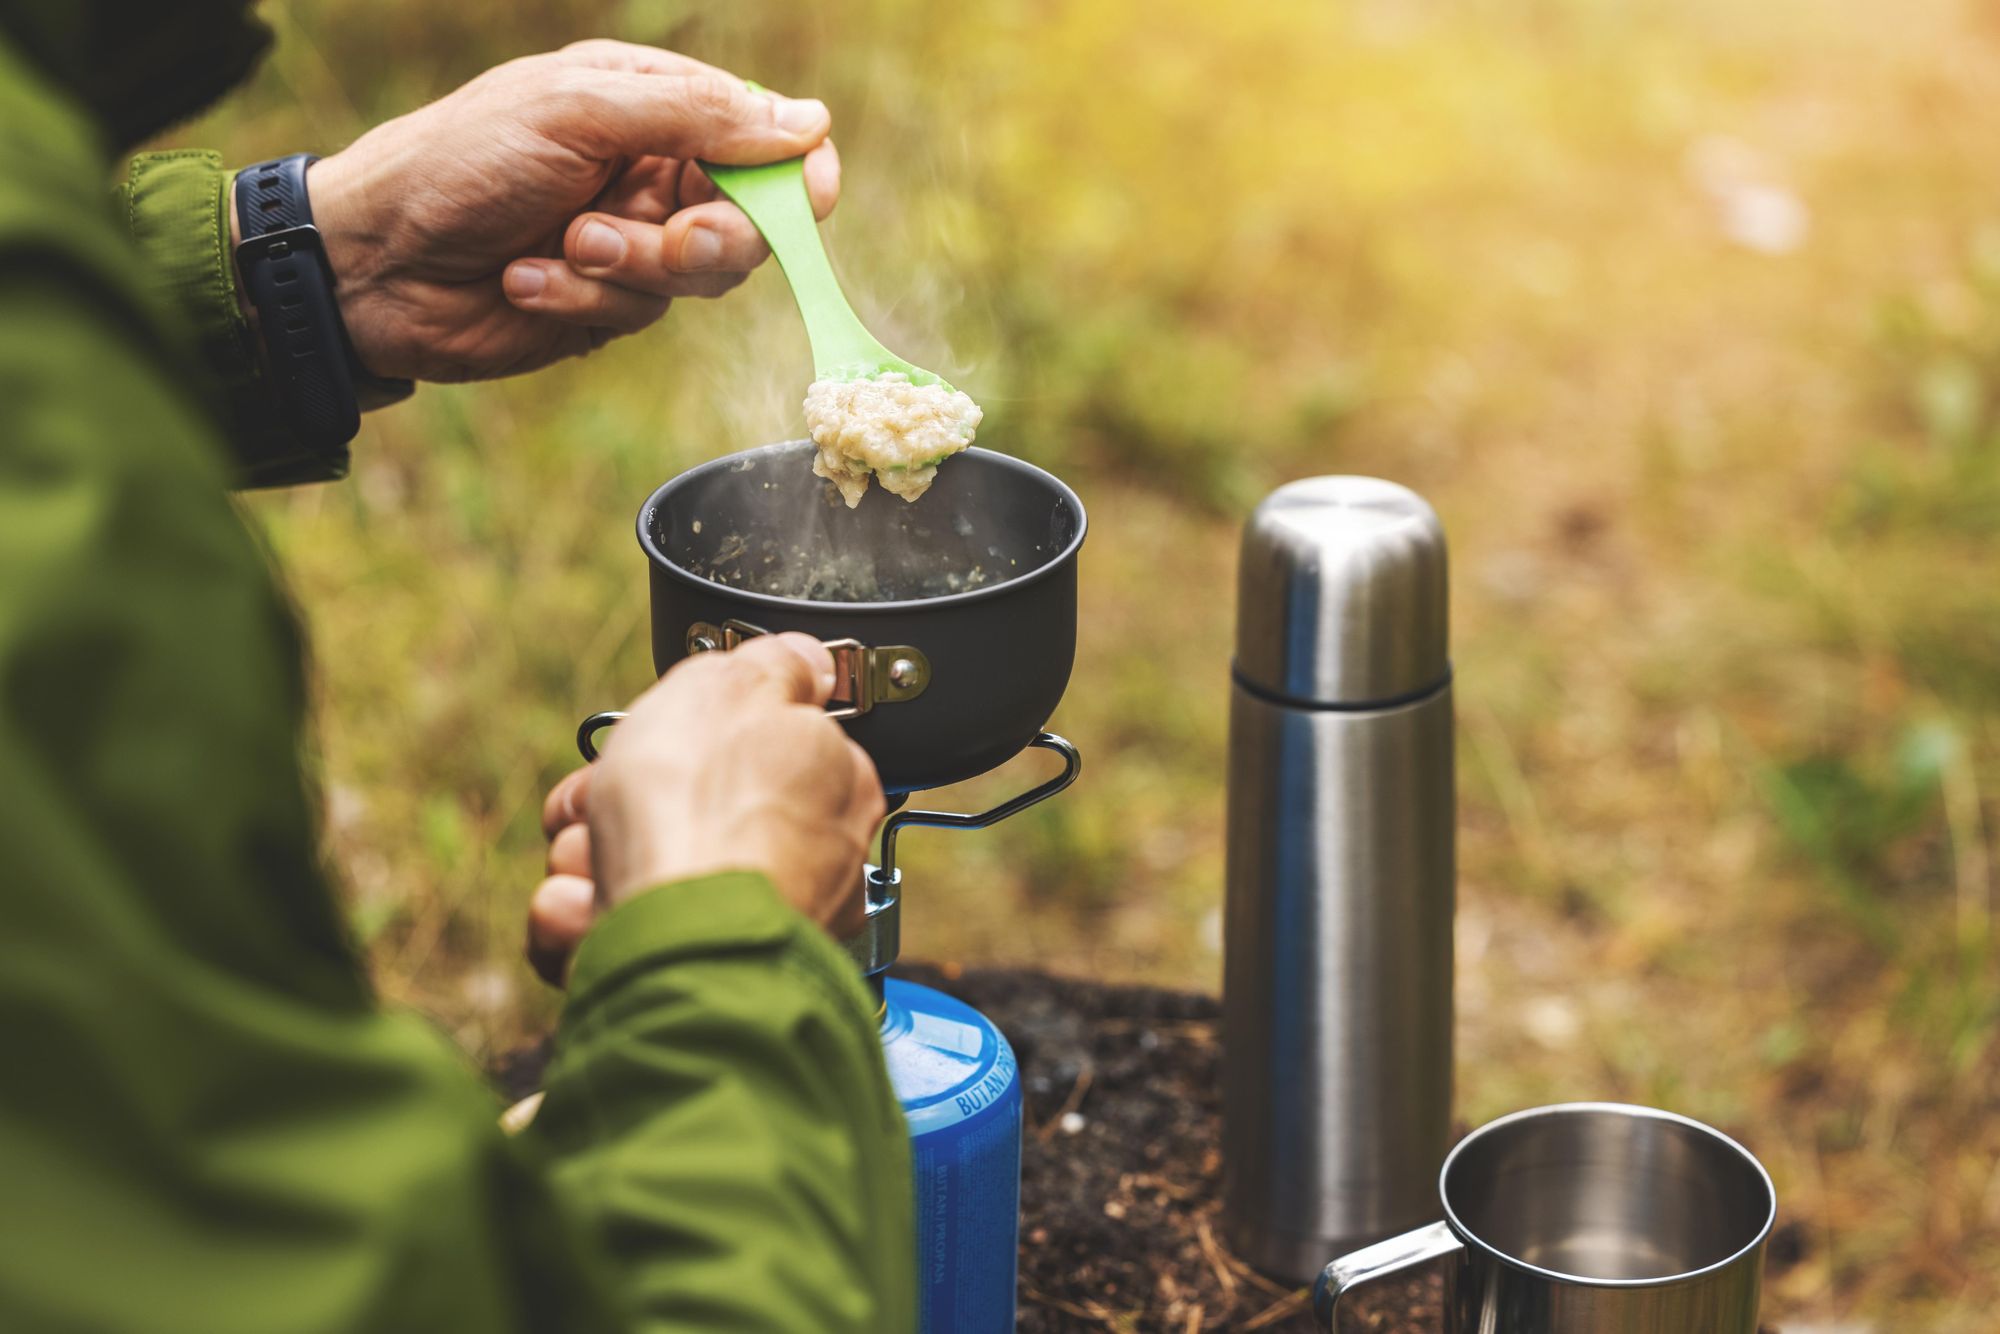 An Appalachian Trail classic; hot oats and coffee to start the morning. Photo: Getty